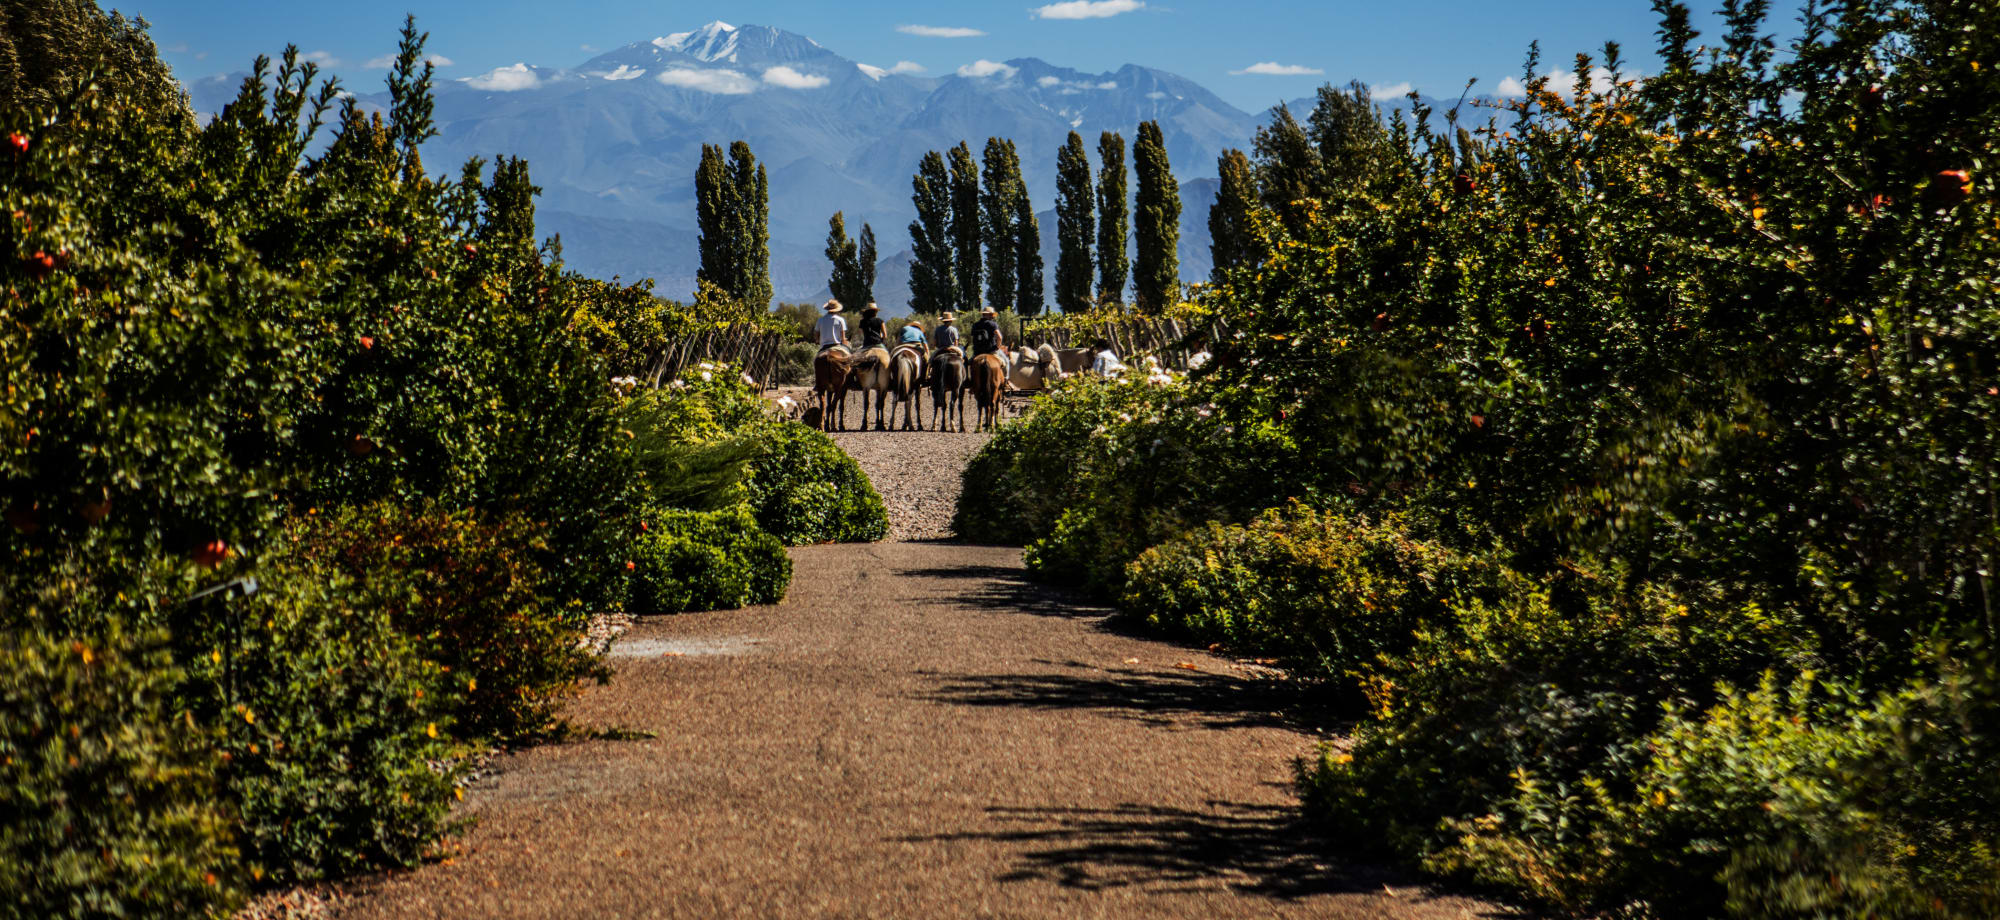 The Andes tower in the background with snow-capped peaks, and in front of them is a large group of horse riders. 